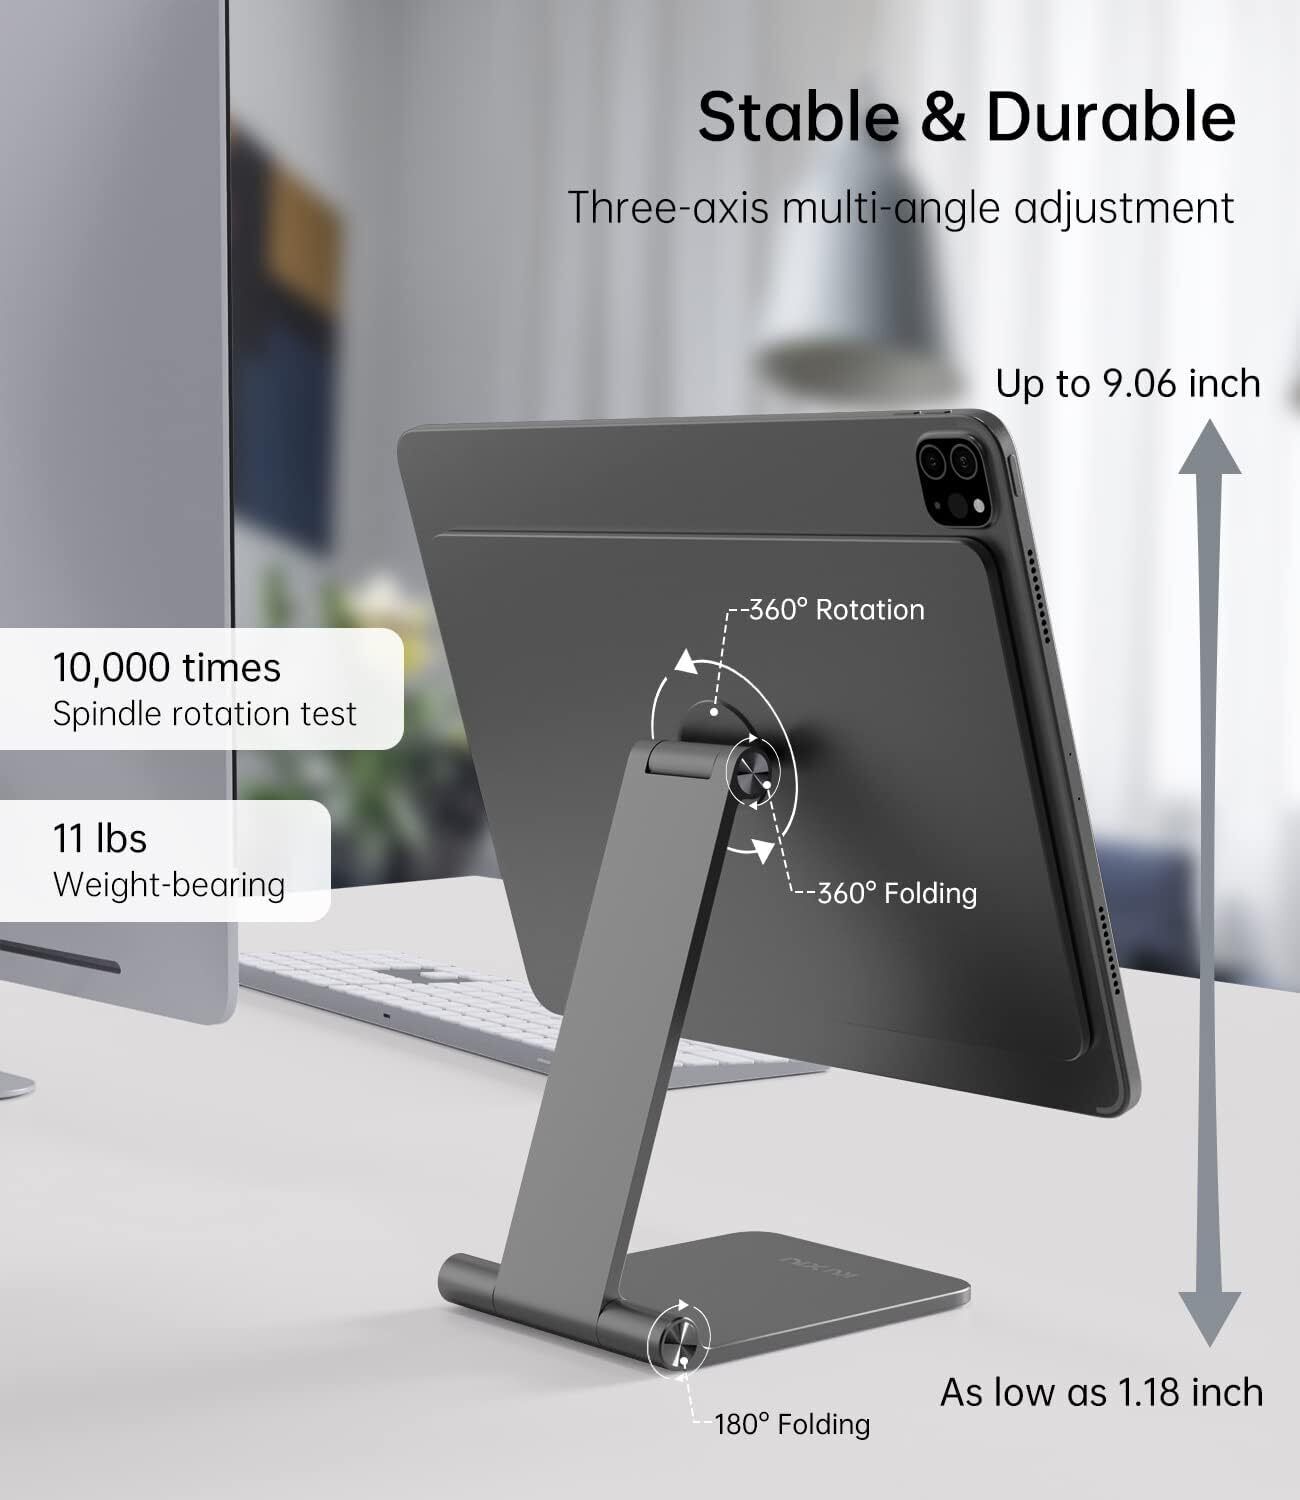 Foldable Magnetic Stand for iPad Pro Portable 360° Adjustable DesktopStand 12.9"